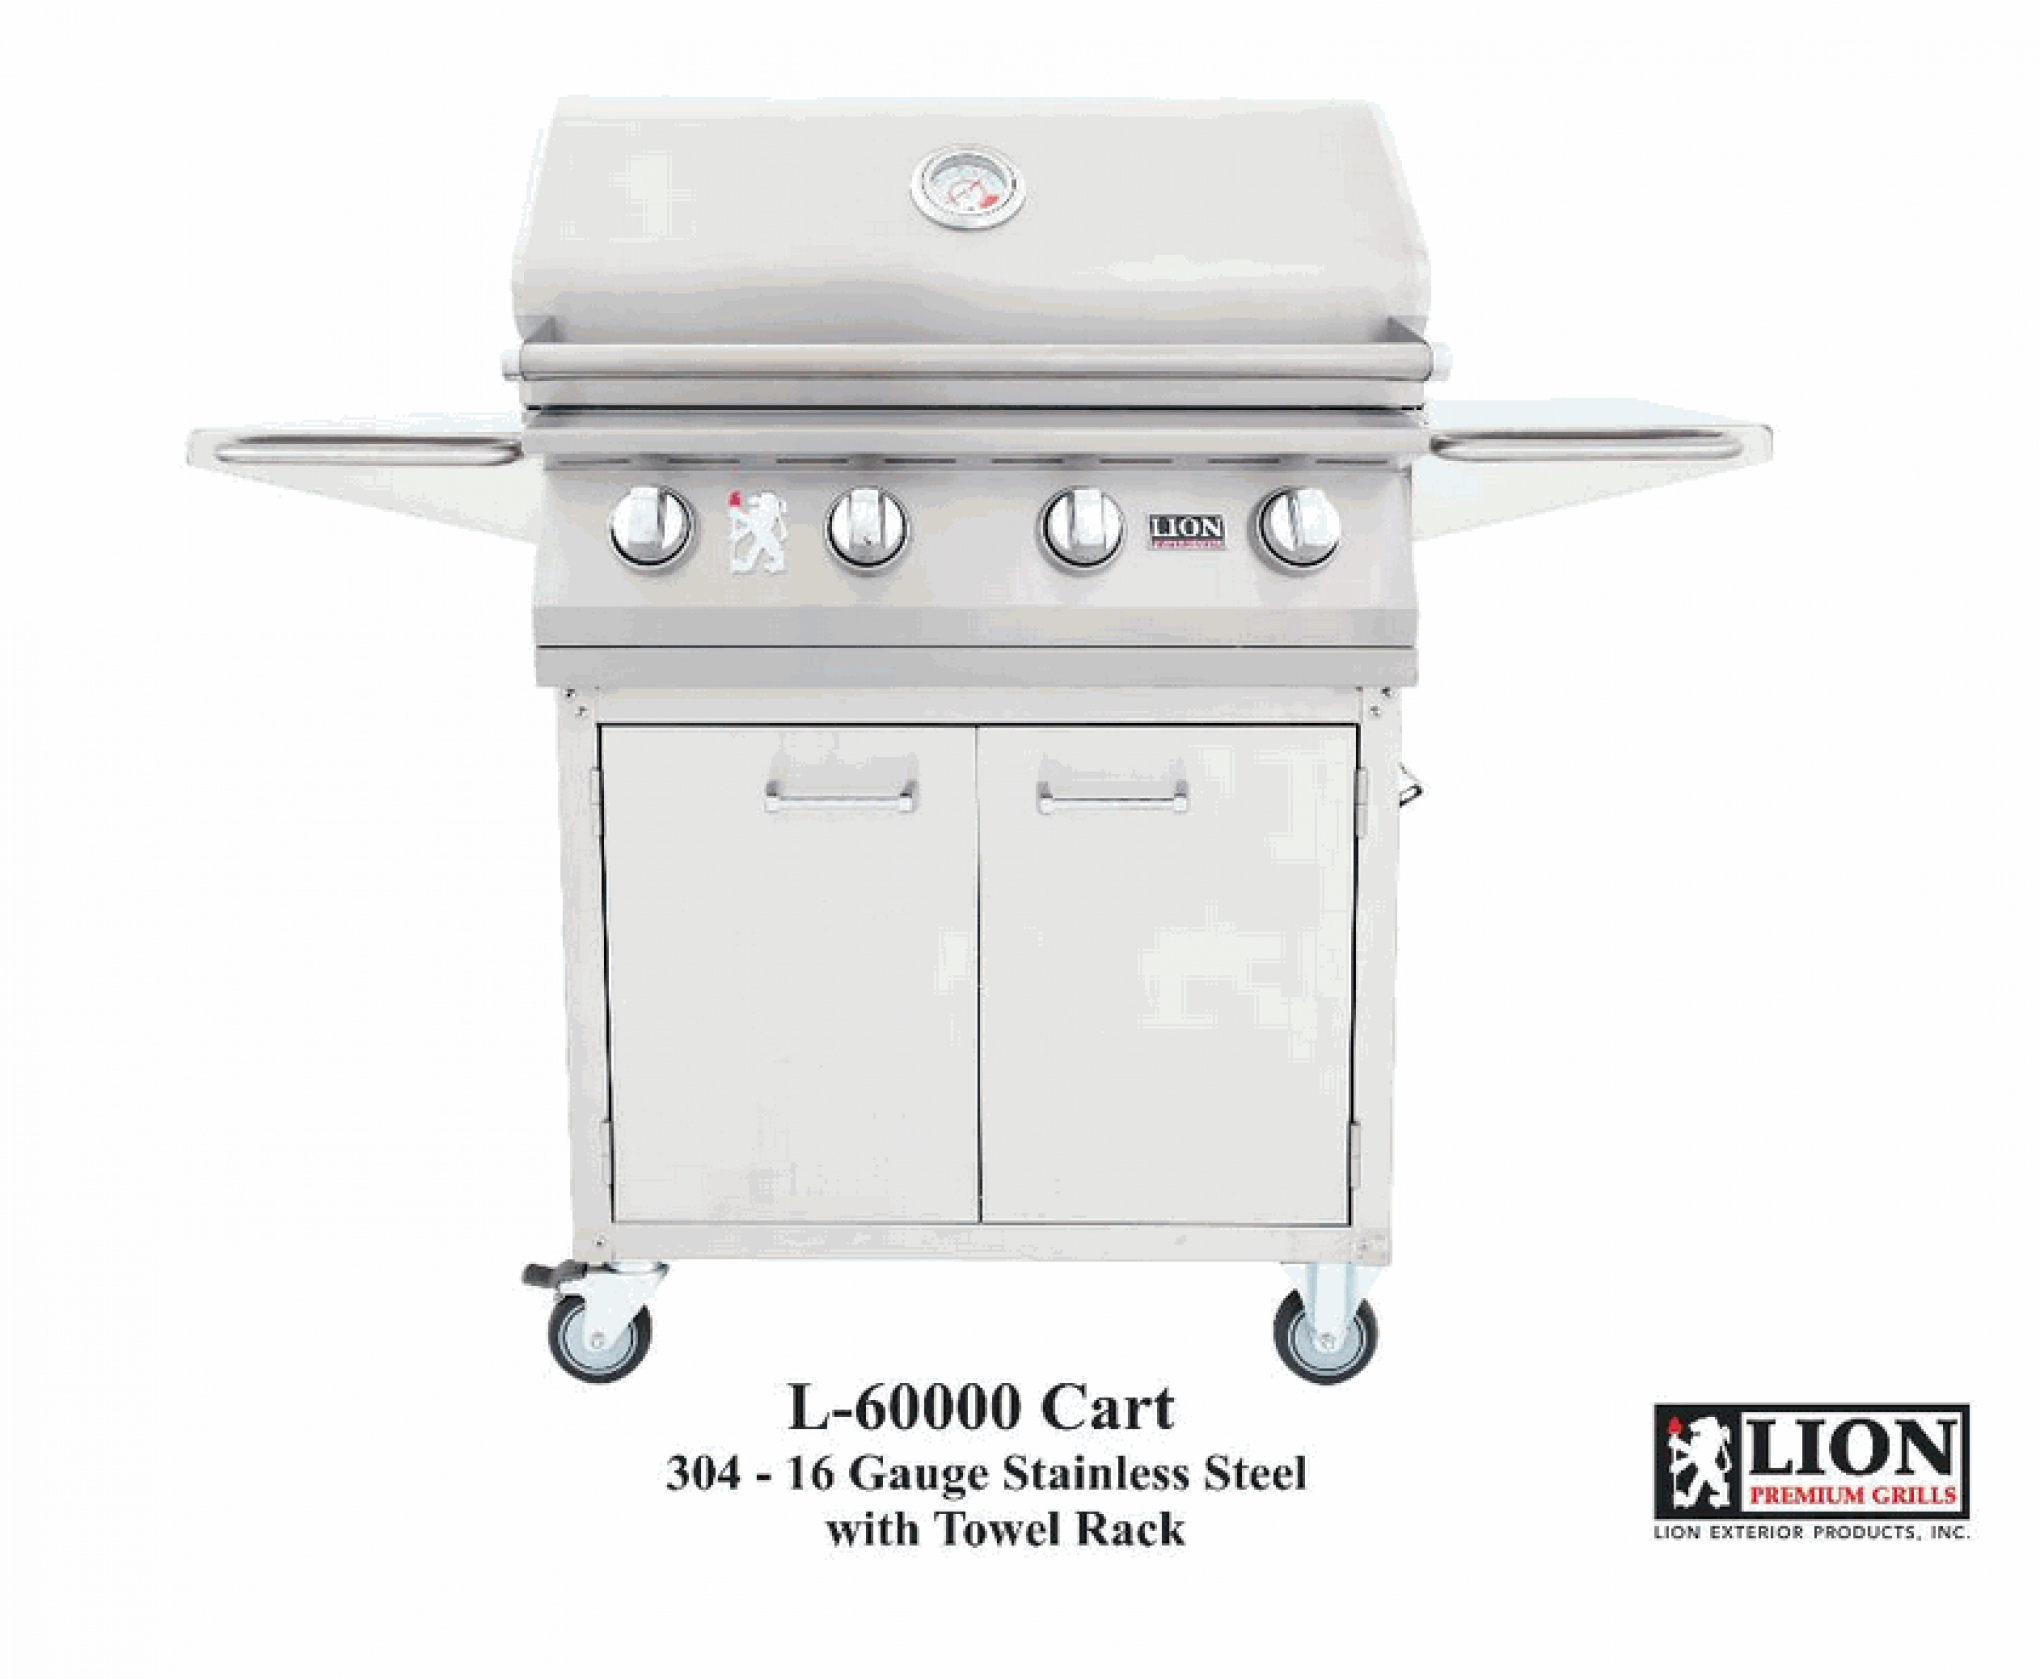 Lion 32" Natural Gas Grill on a Cart with No Lights and No Rear Burner